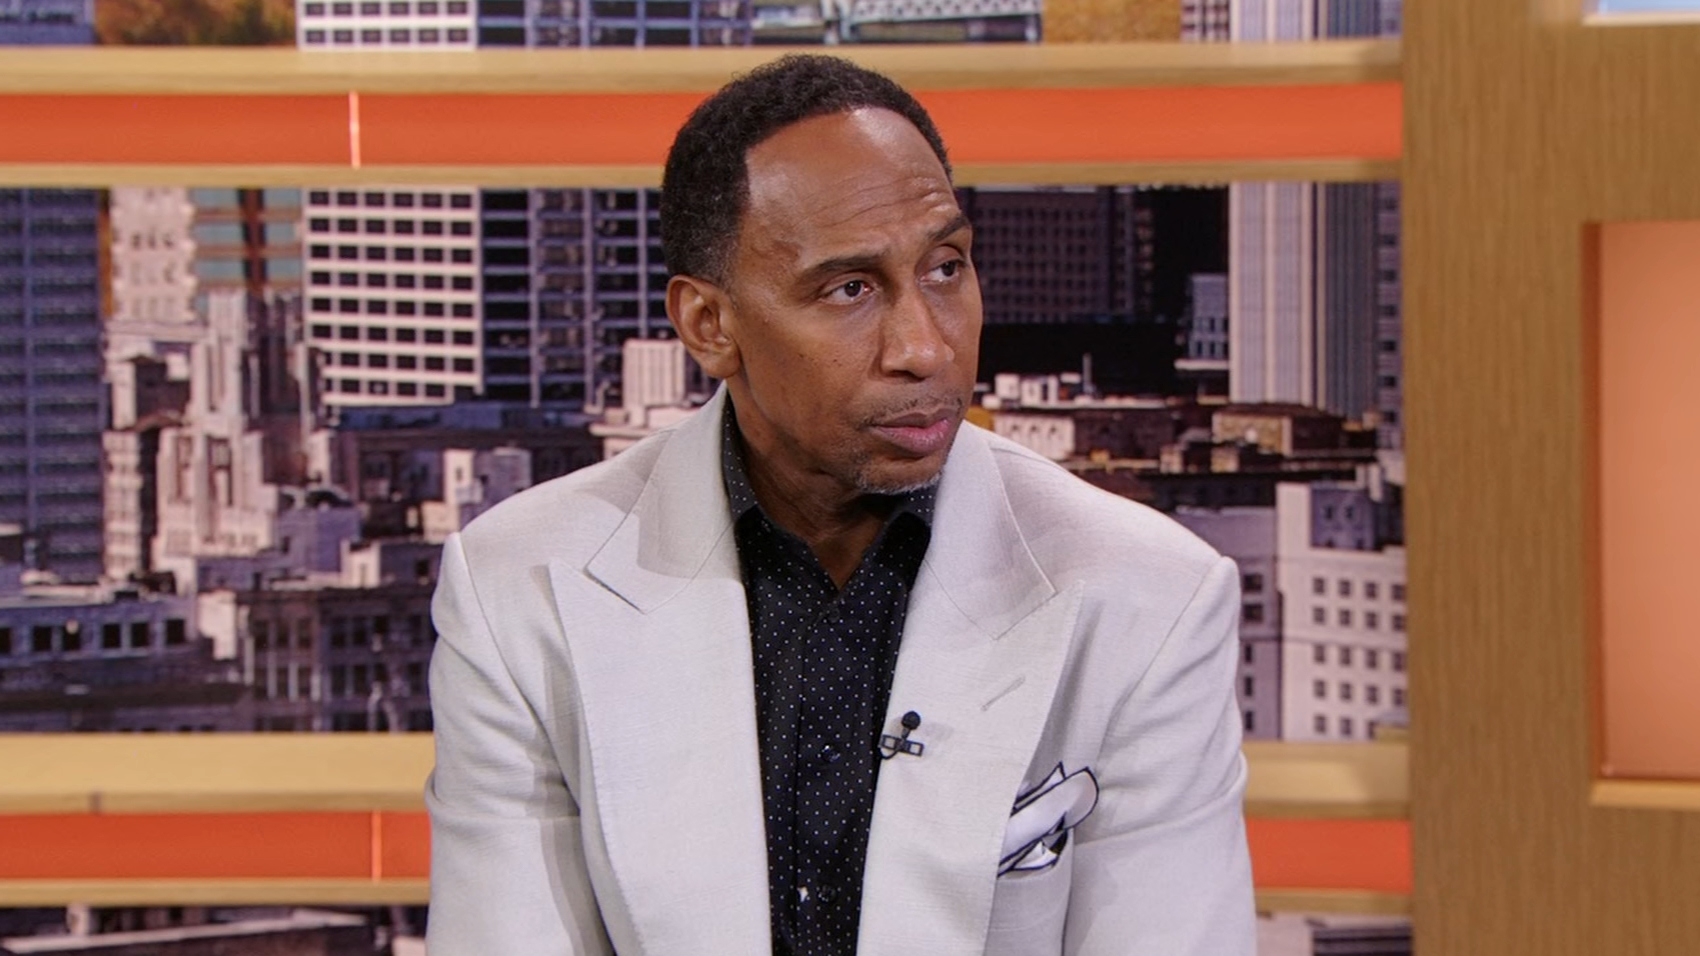 Stephen A. rips NCAA's 'sham system' for taking advantage of athletes